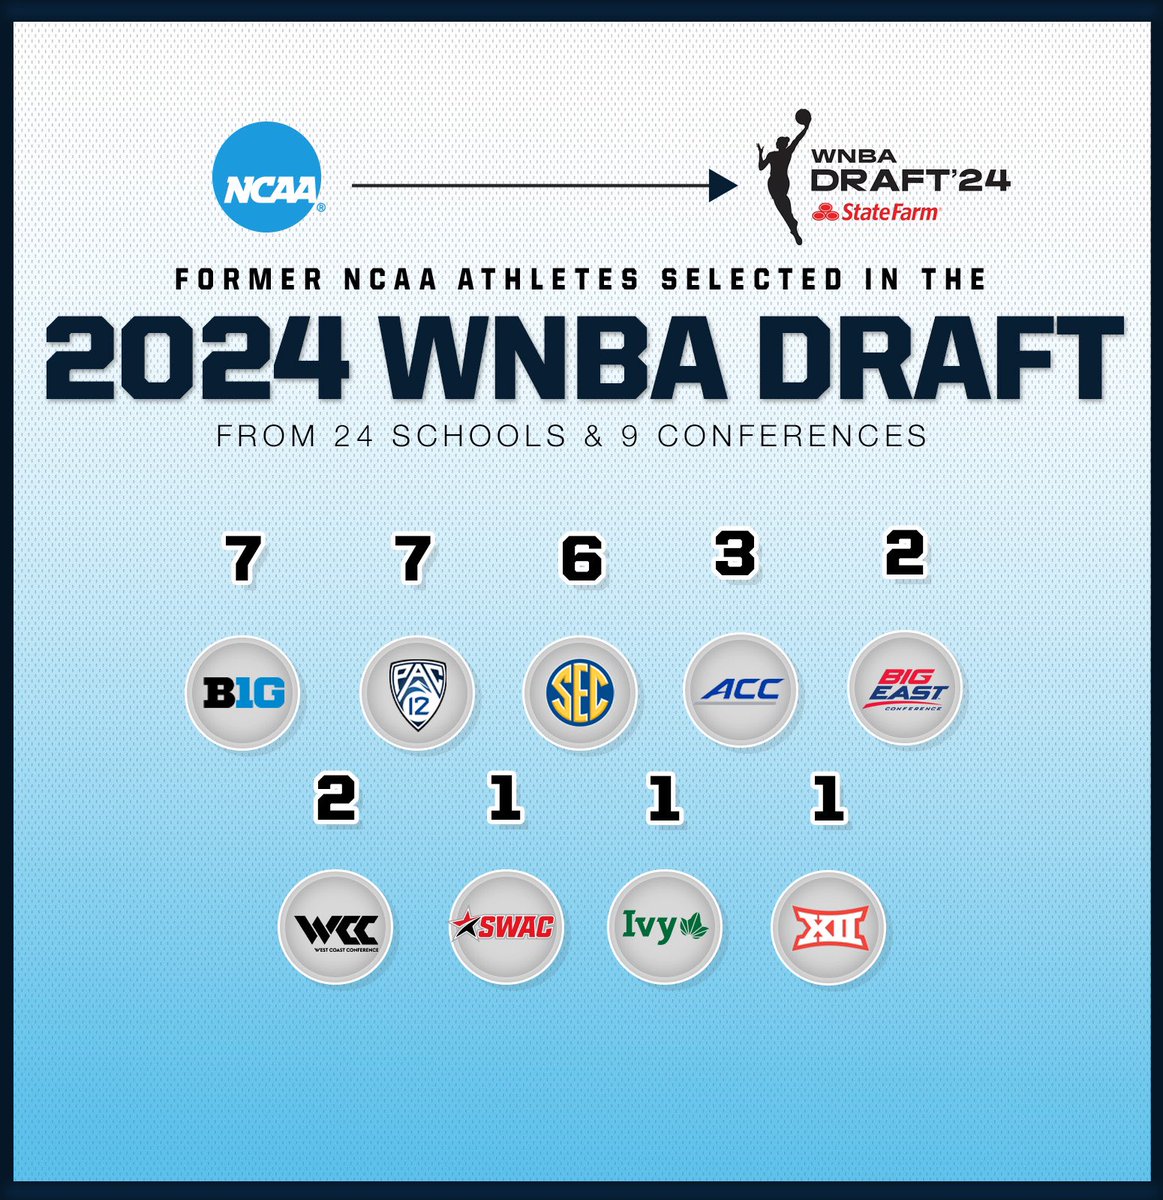 The picks are in 🔥 Congratulations to the 30 former @MarchMadnessWBB ballers heading to the @WNBA! 🏀 #NCAAWBB x #WNBADraft